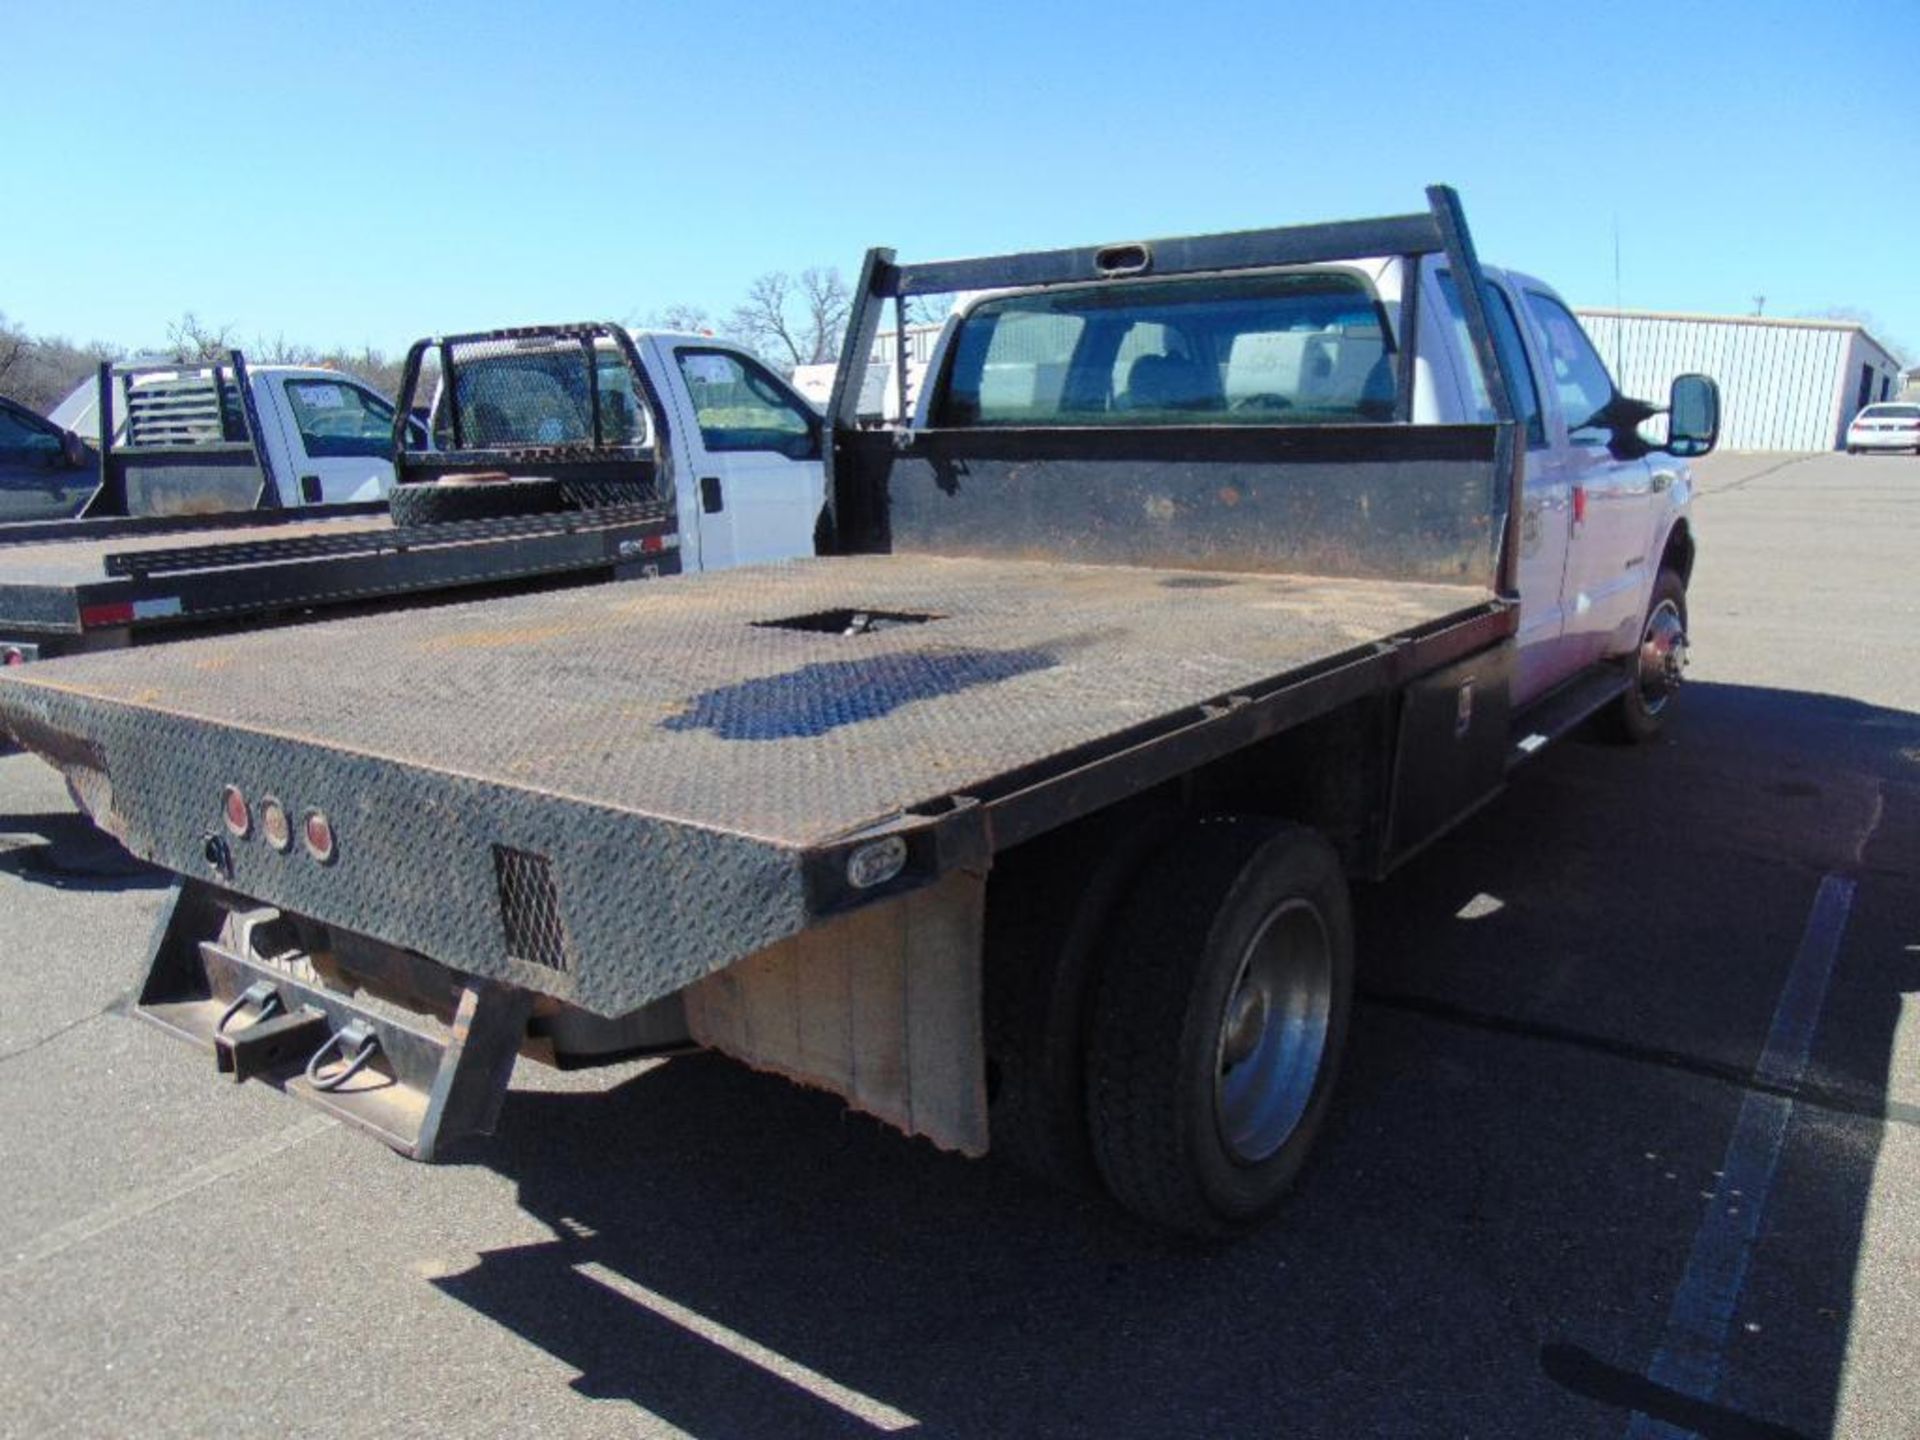 2001 Ford F450 Crewcab Flatbed s/n 1fdxw46f81ec38467, 7.3 diesel eng, auto trans, od reads 265046 - Image 3 of 7